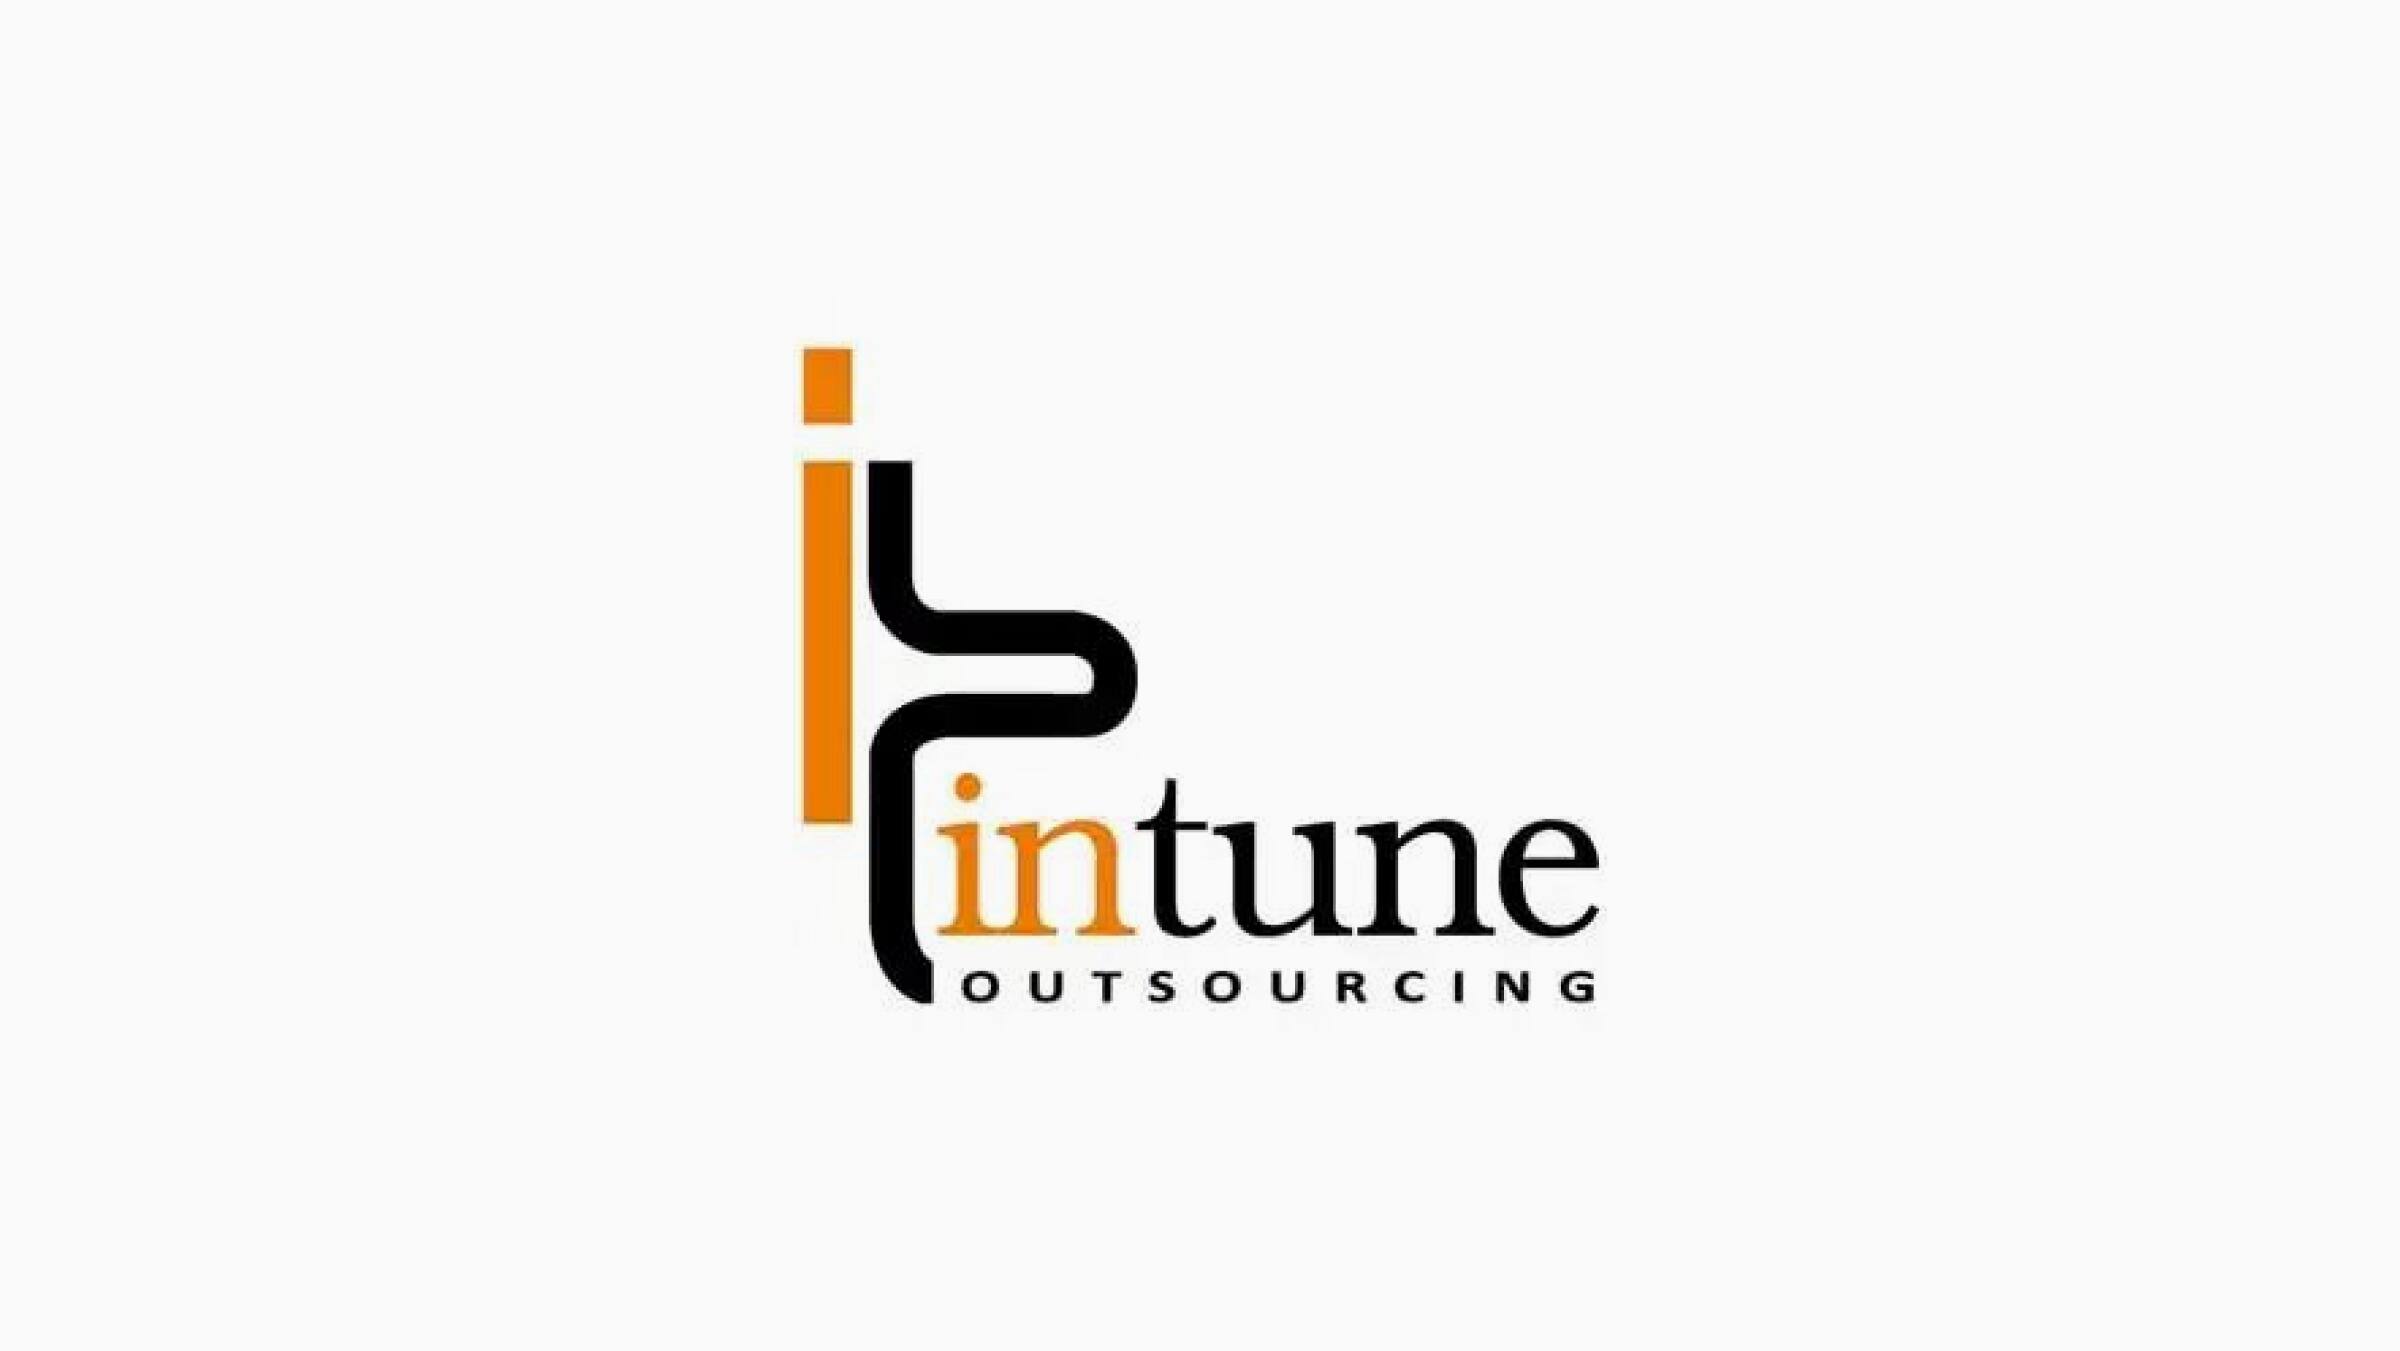 The InTune Outsourcing logo